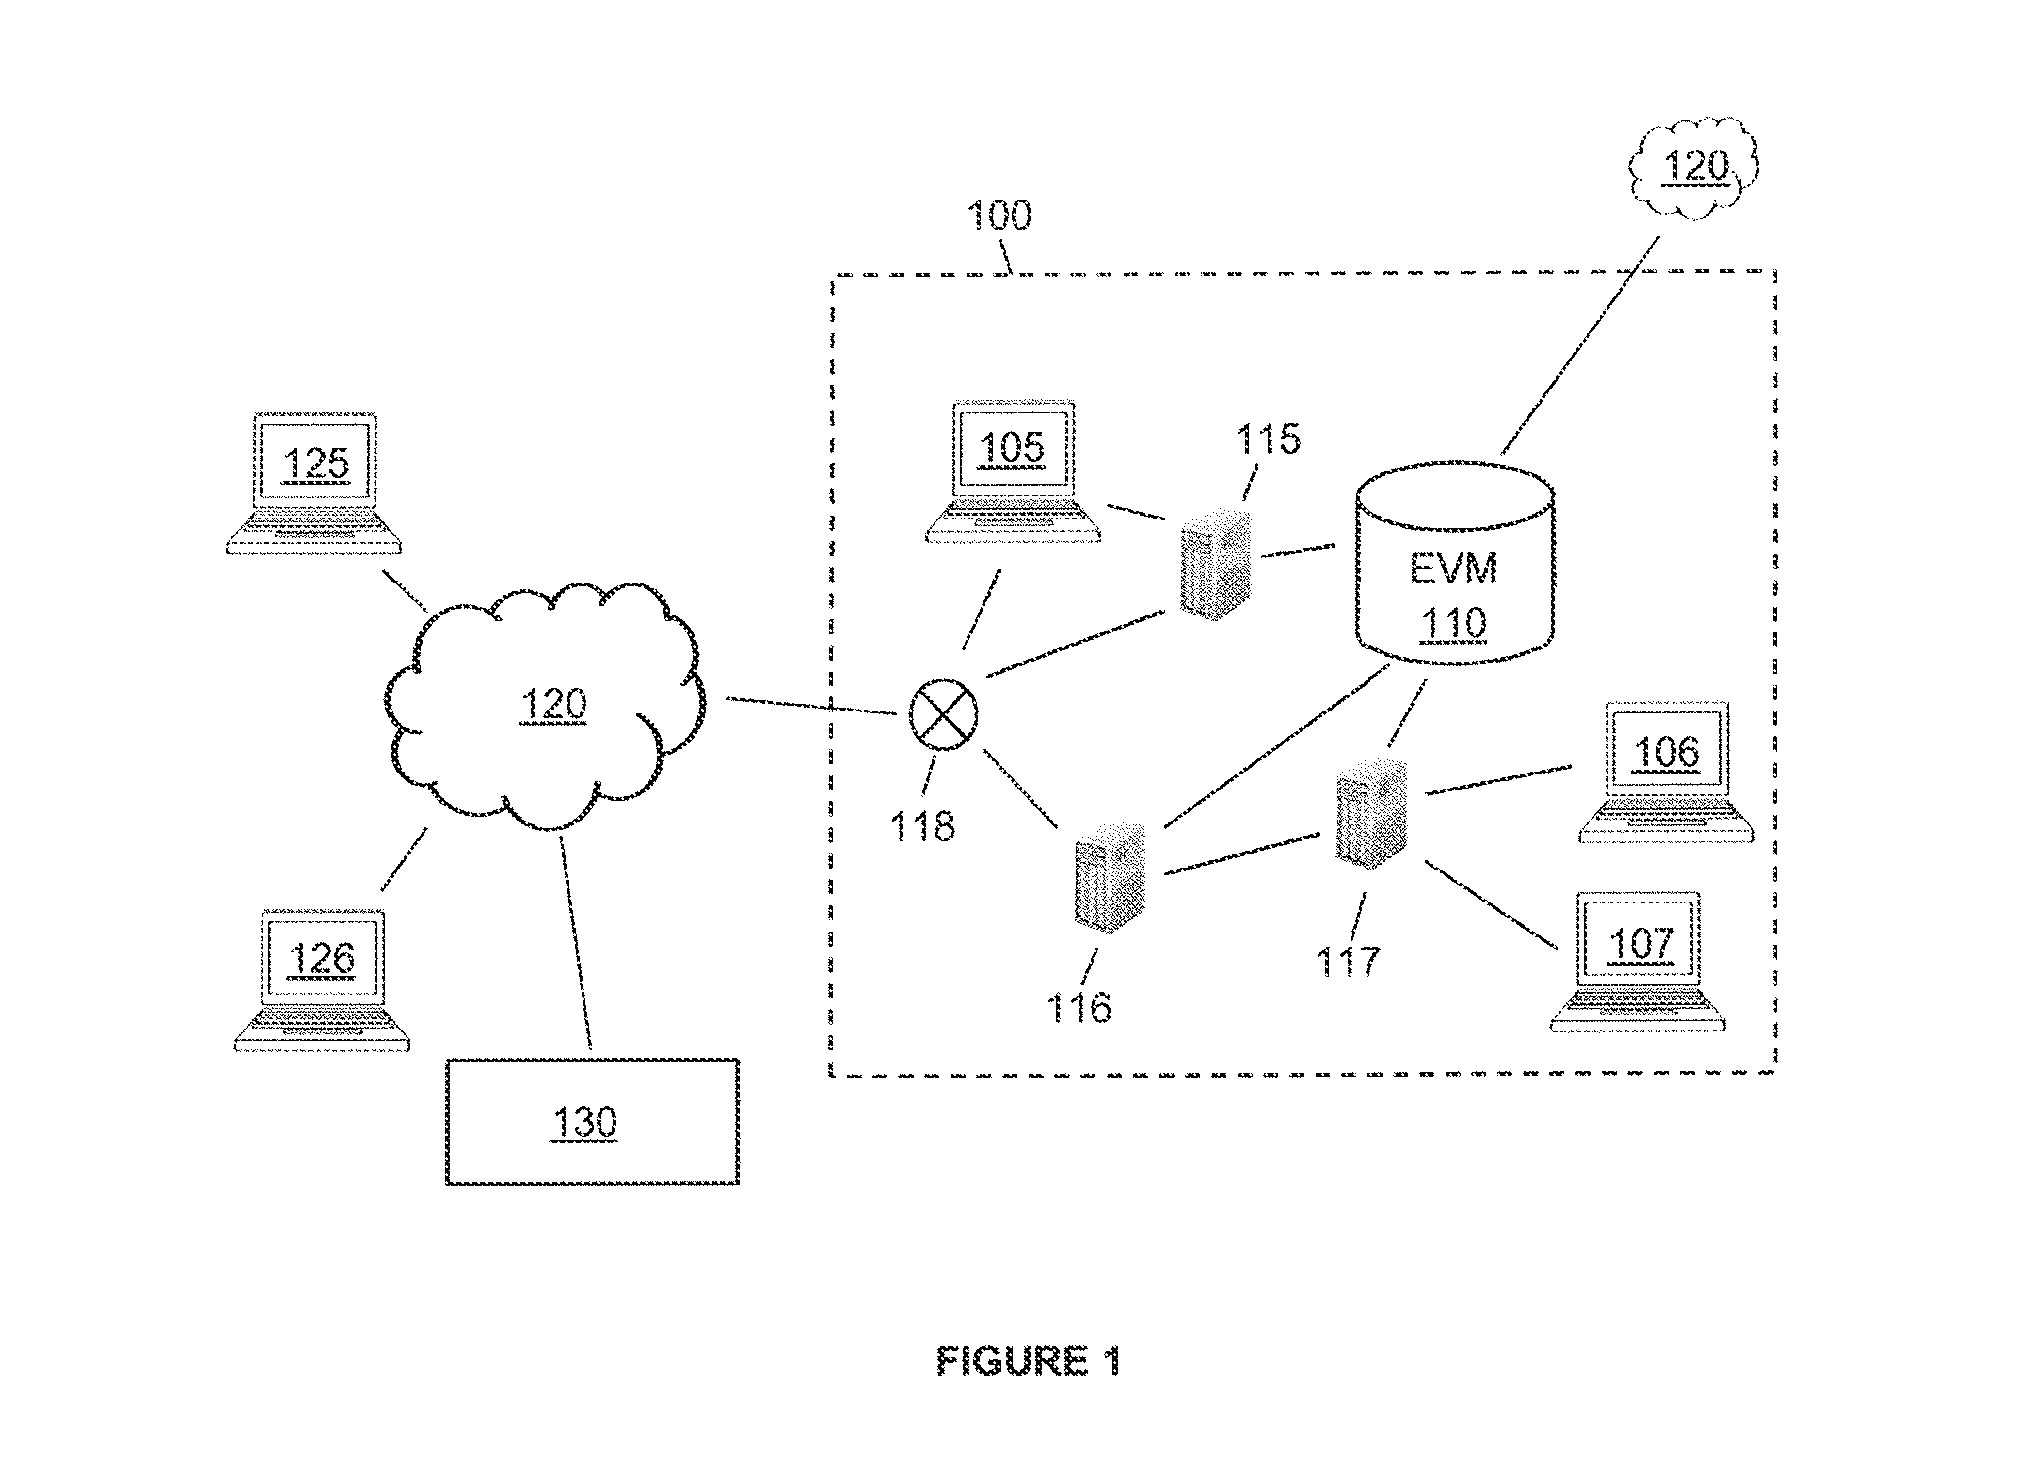 System and Method for Information Security Threat Disruption via a Border Gateway